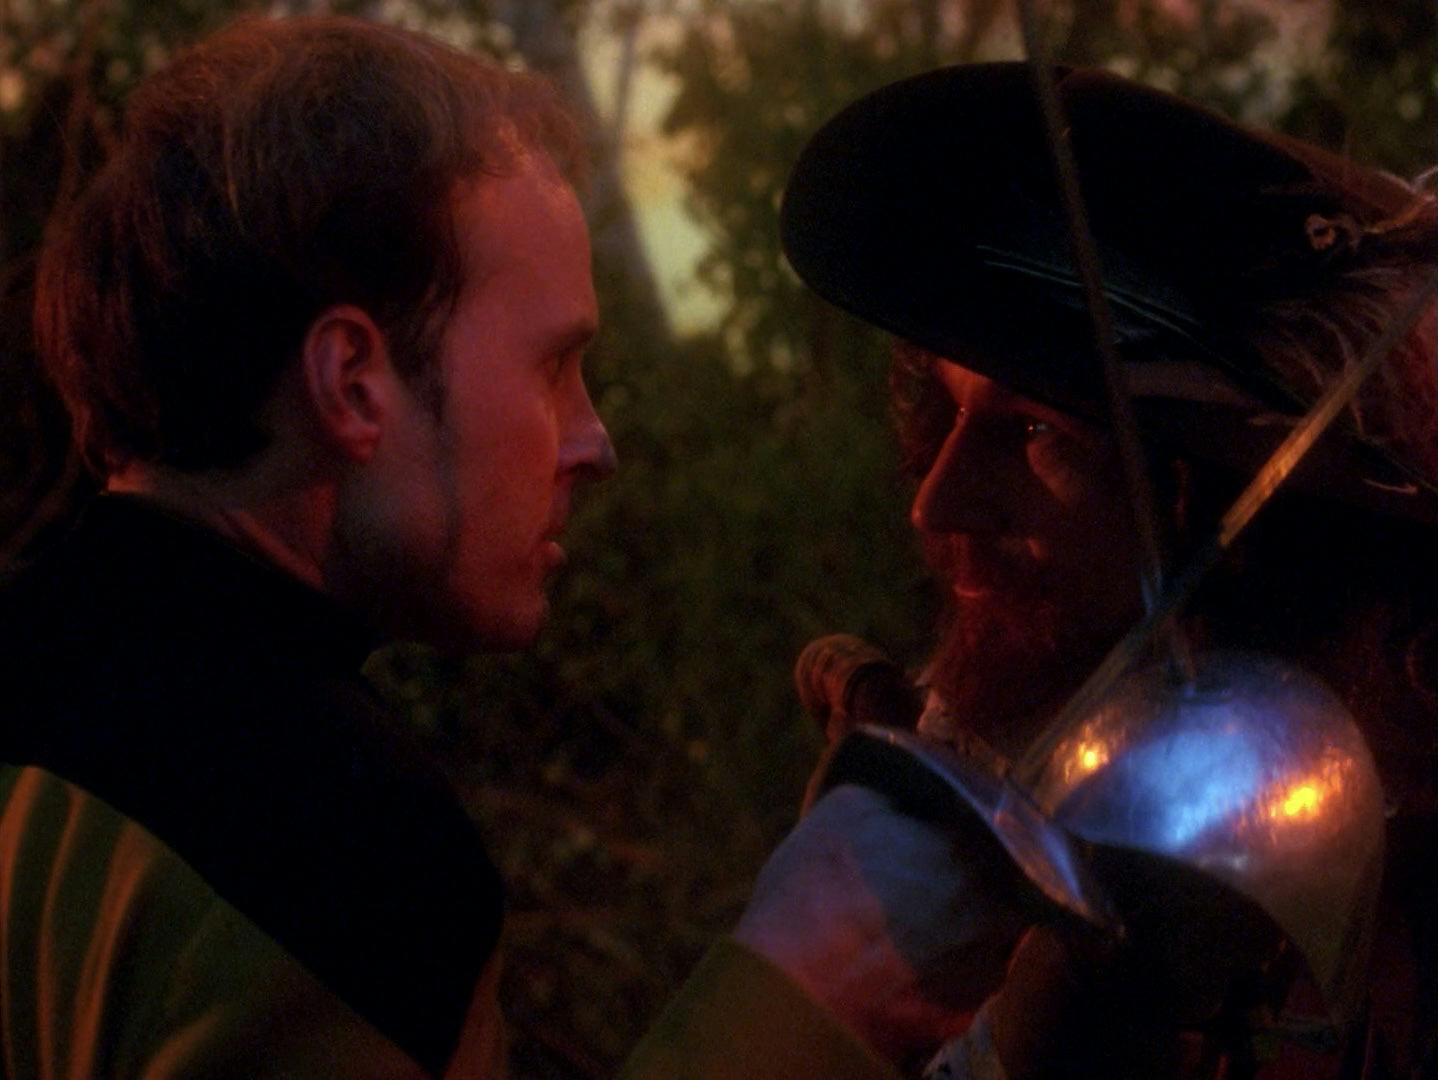 Barclay and Holo-Picard engage in swordplay on the Holodeck in Star Trek: The Next Generation